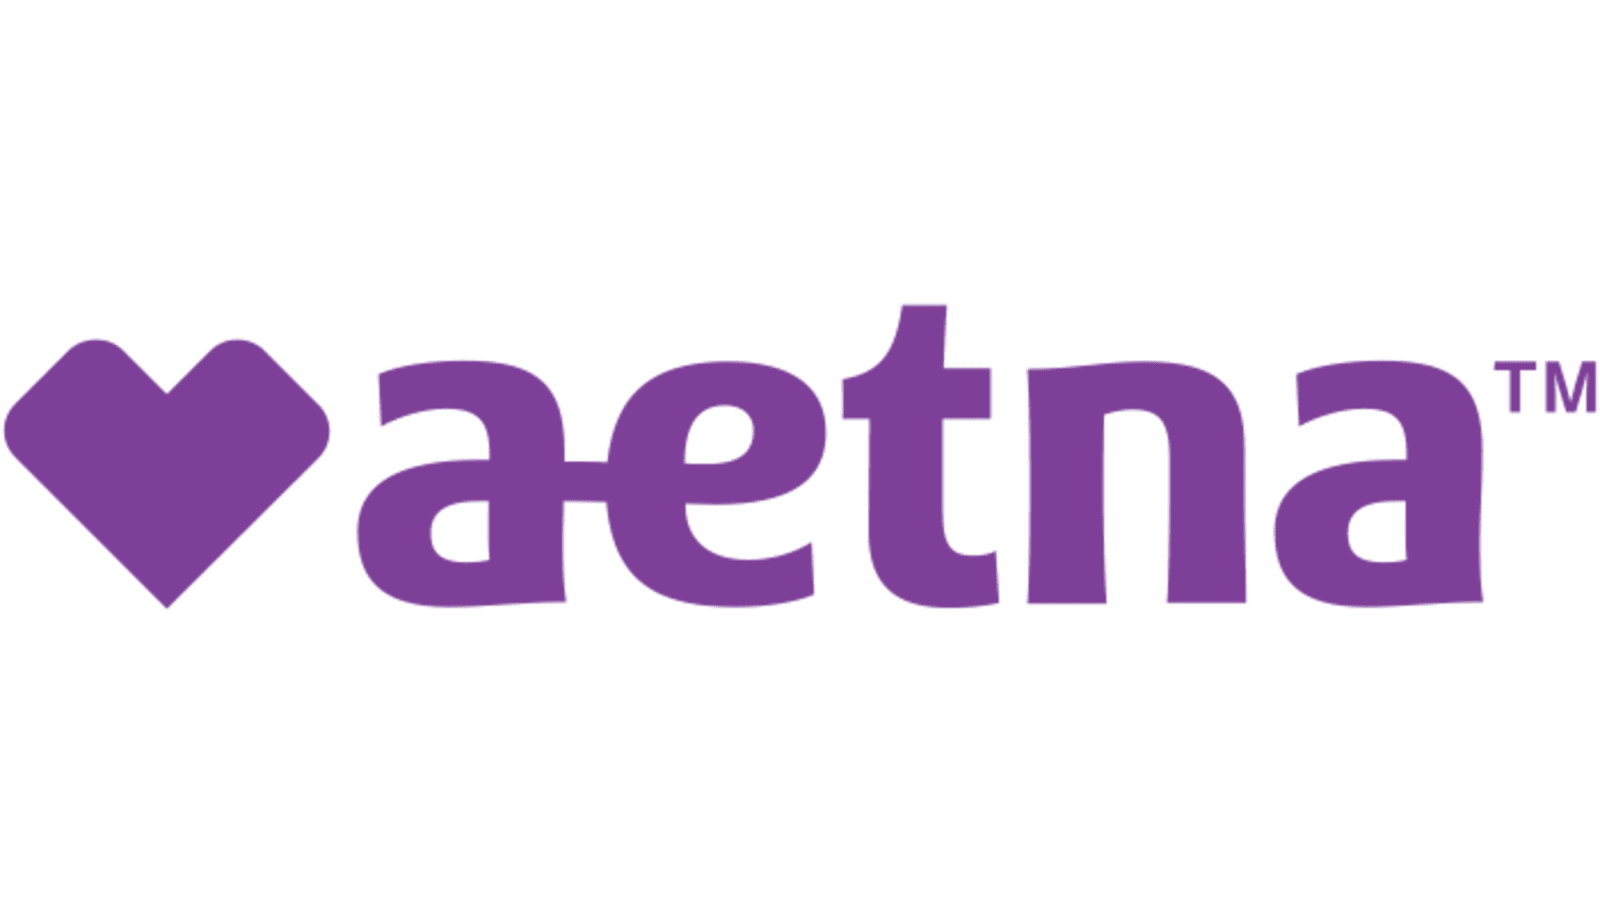 Aetna CVS Health Insurance Review Cheap Rates, Limited Plans